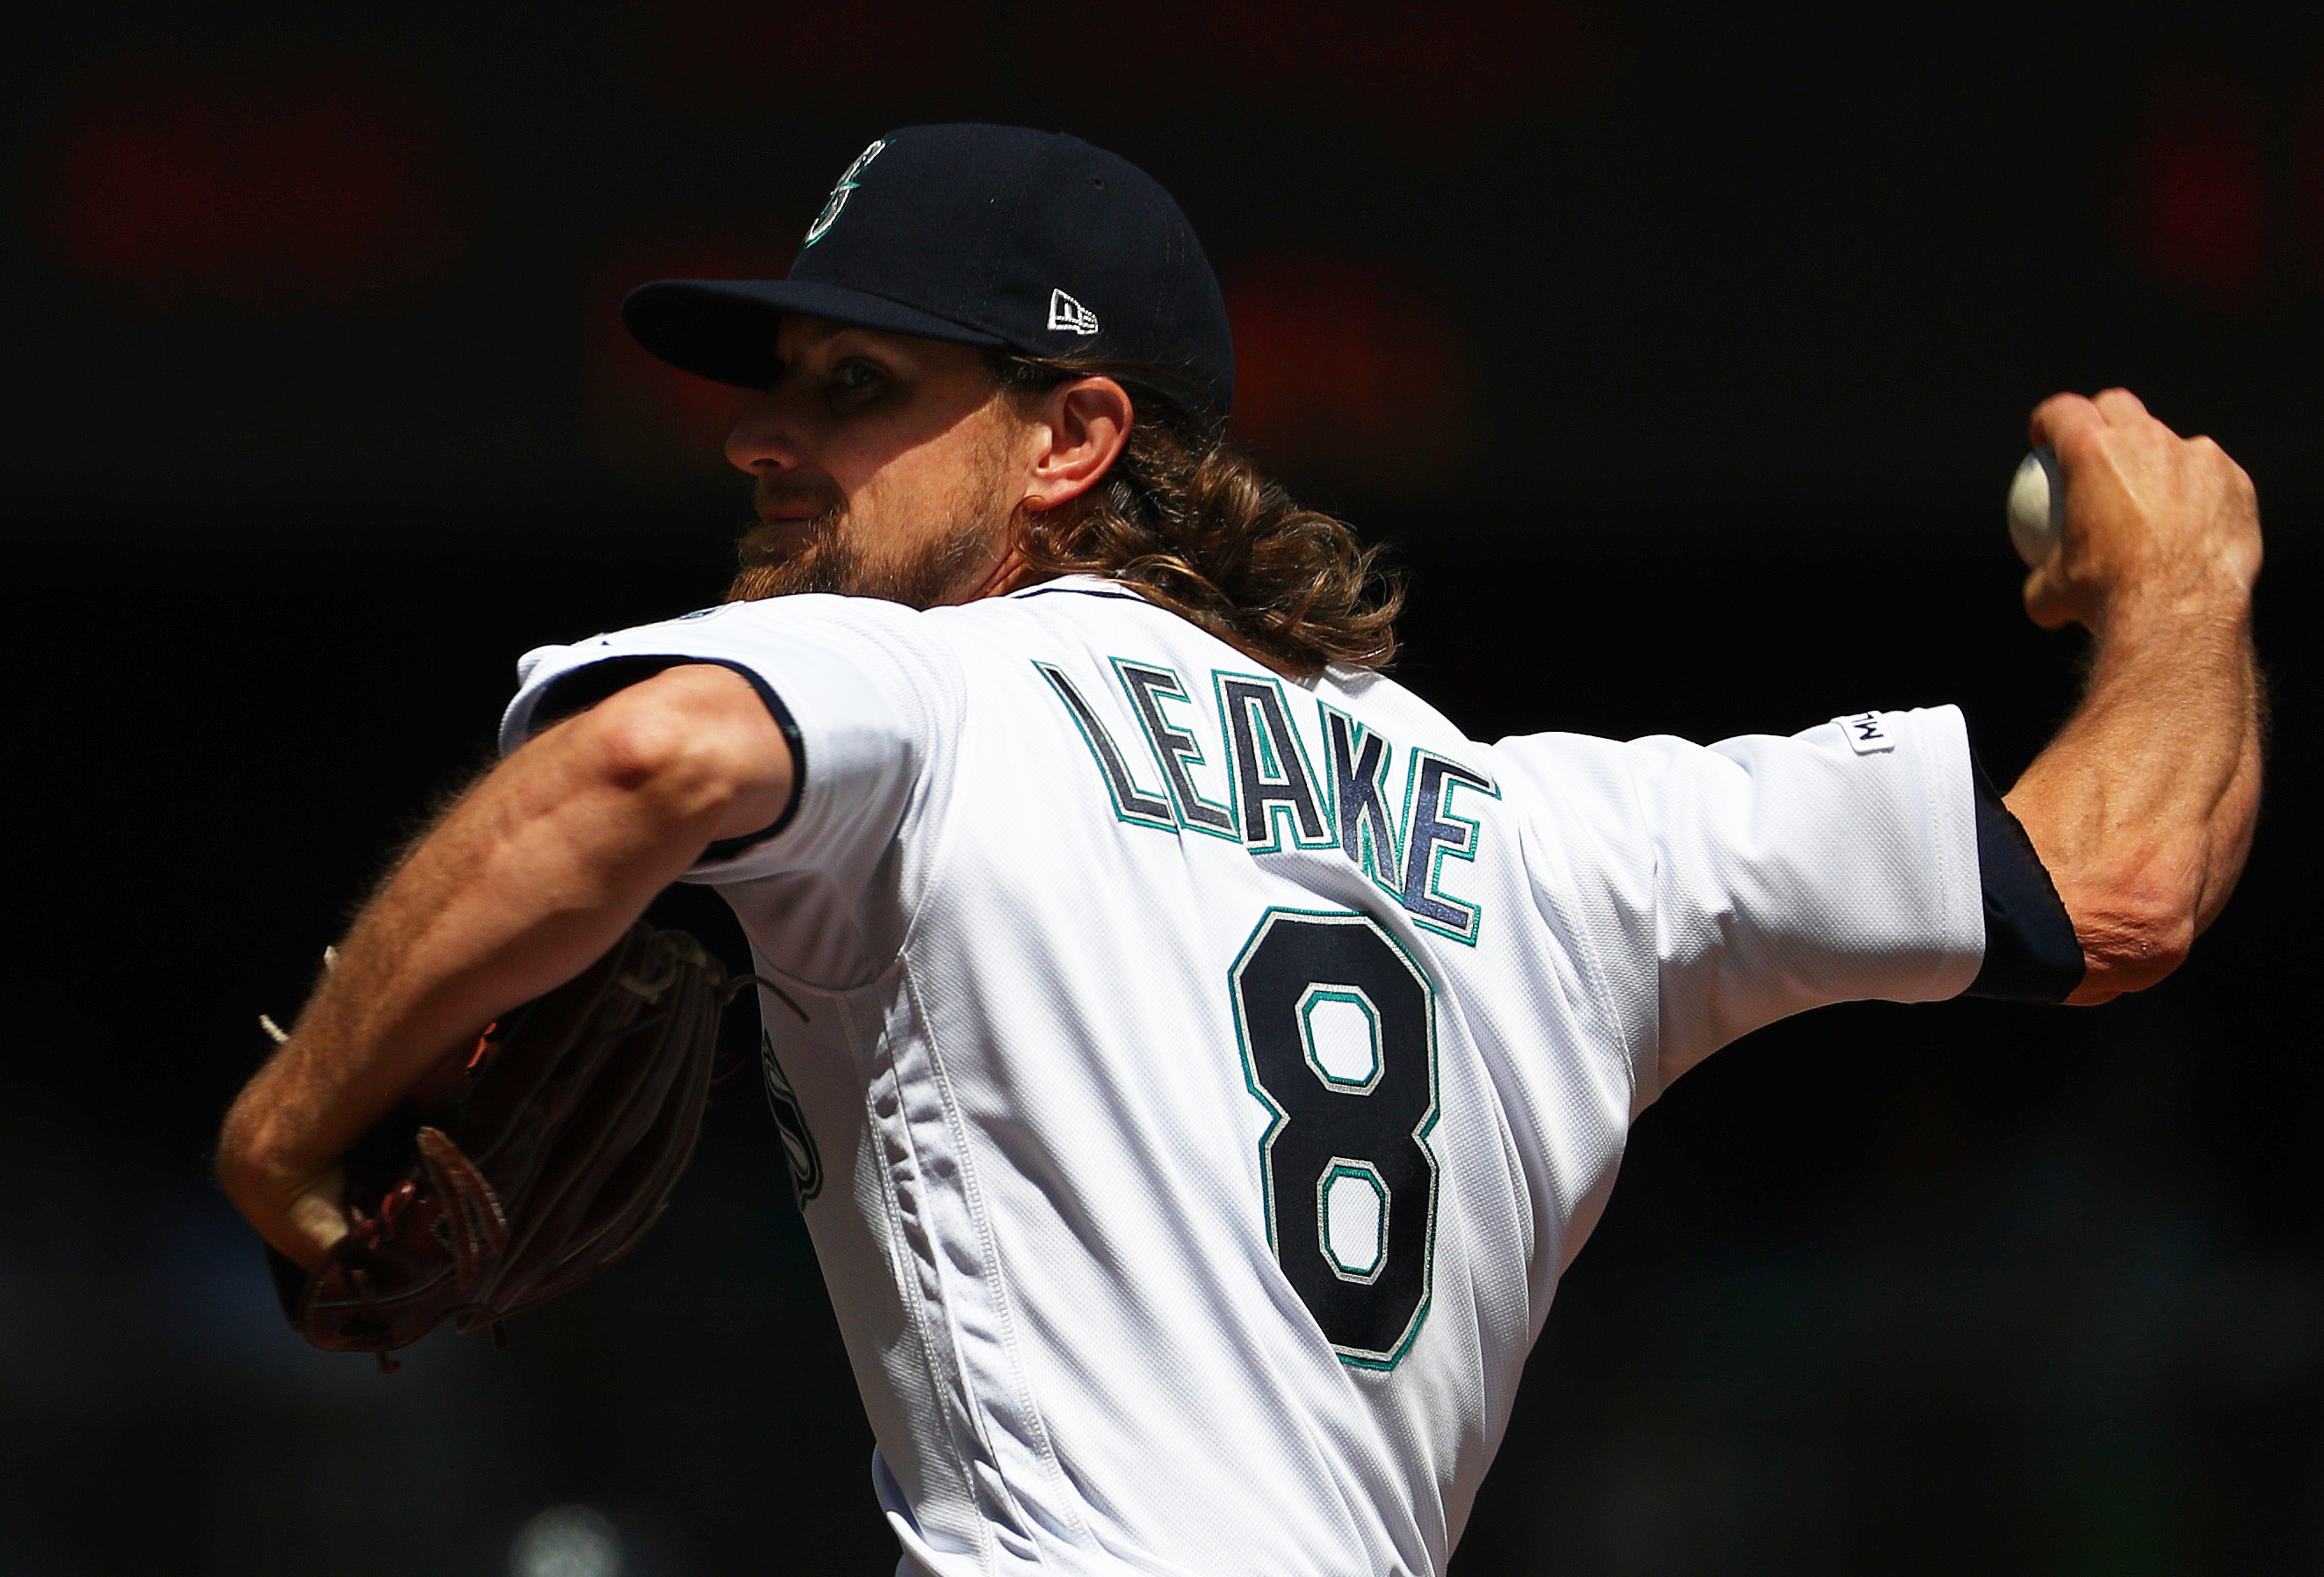 This series will include Mike Leake’s first start as a D-back